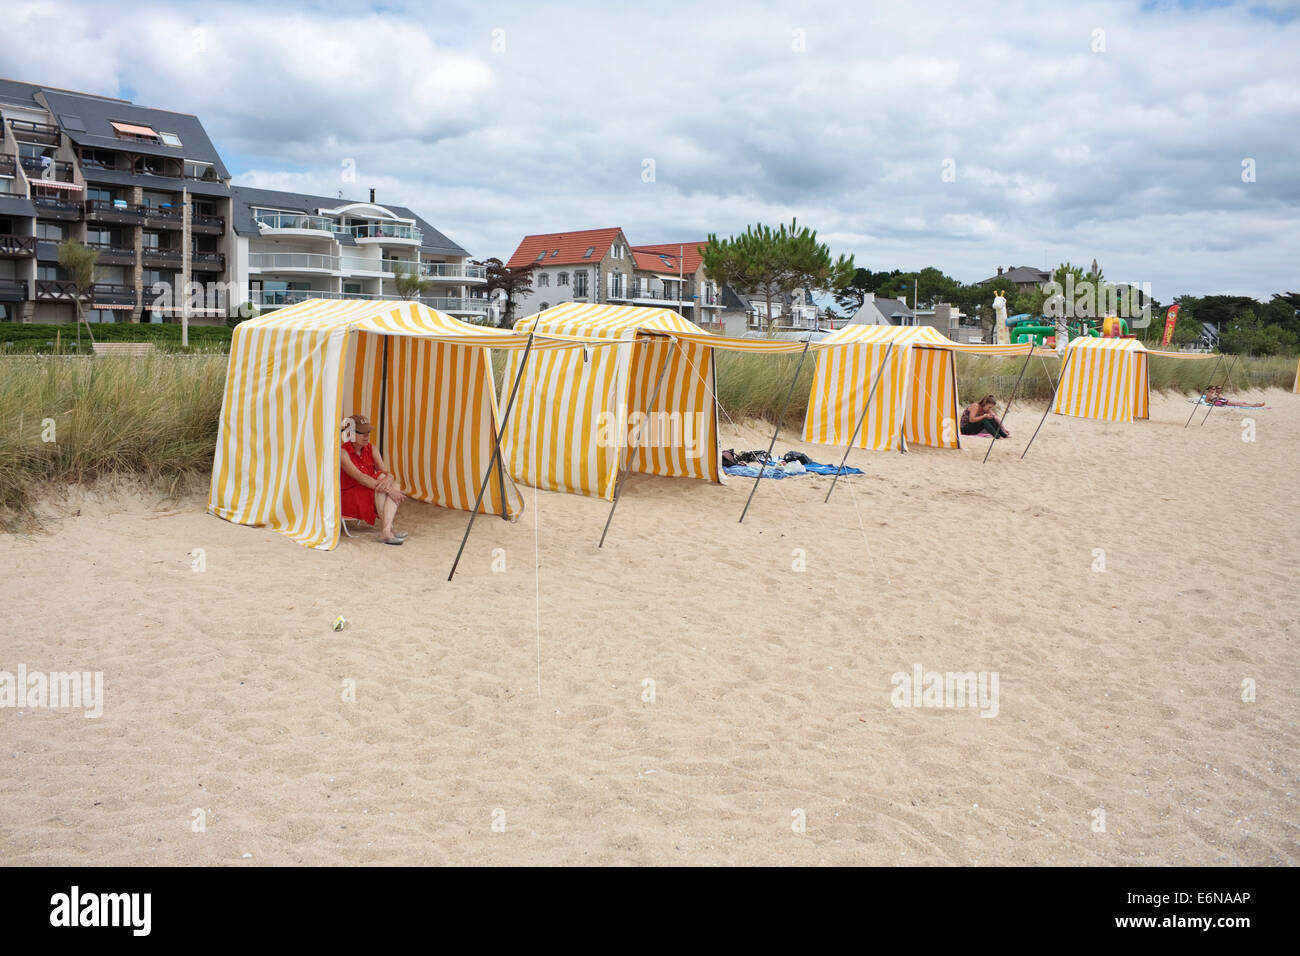 Beach shelters on Carnac Plage, Brittany, France Stock Photo